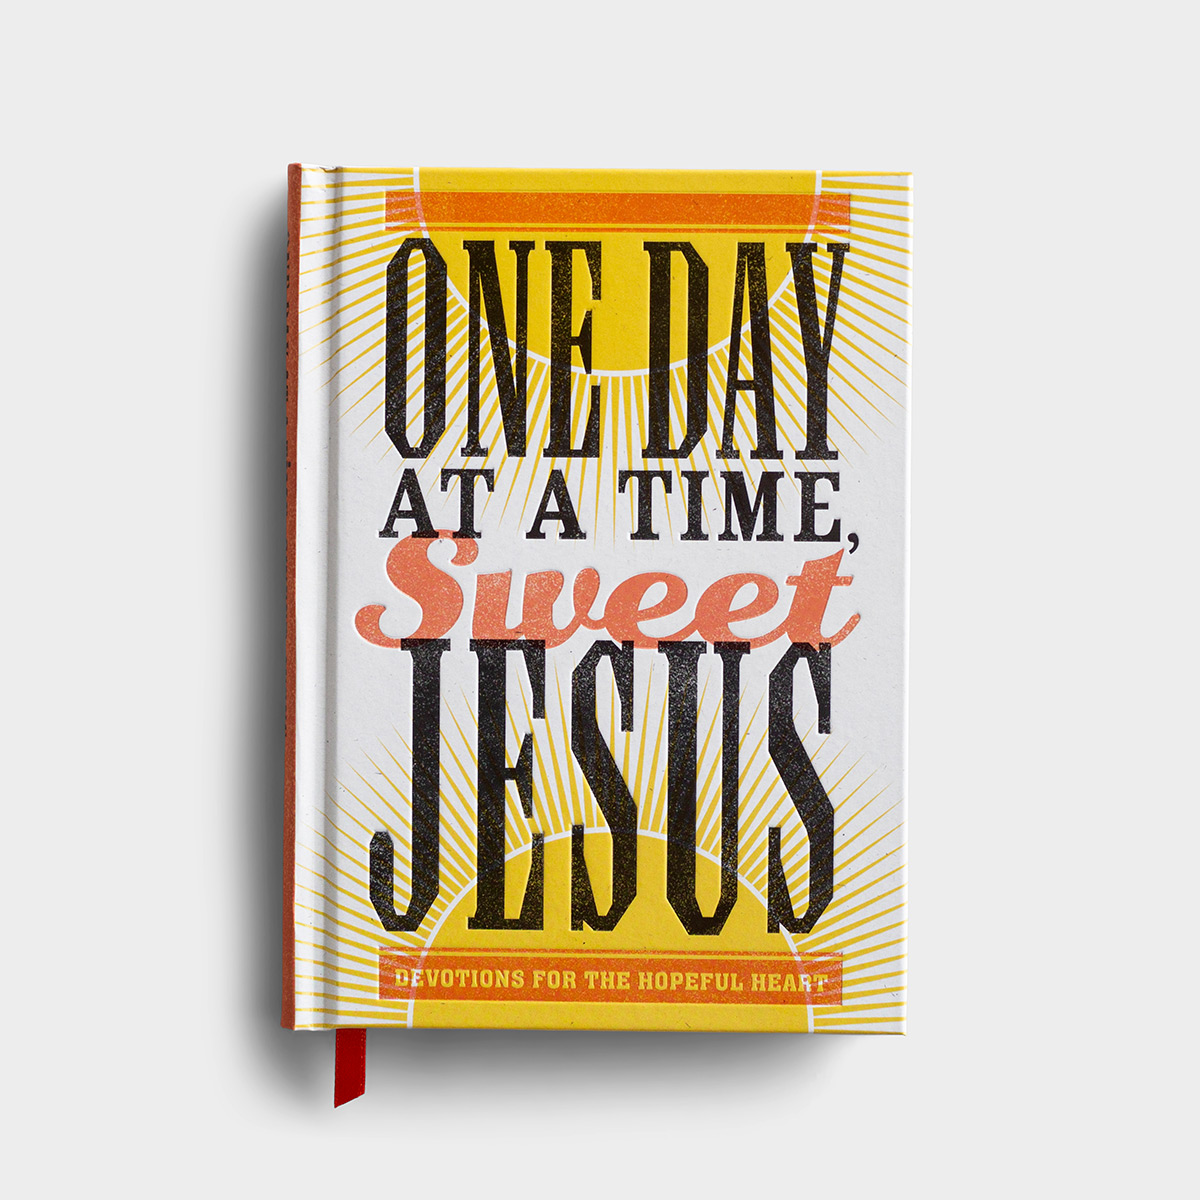 One Day at a Time, Sweet Jesus - Devotional Gift Book